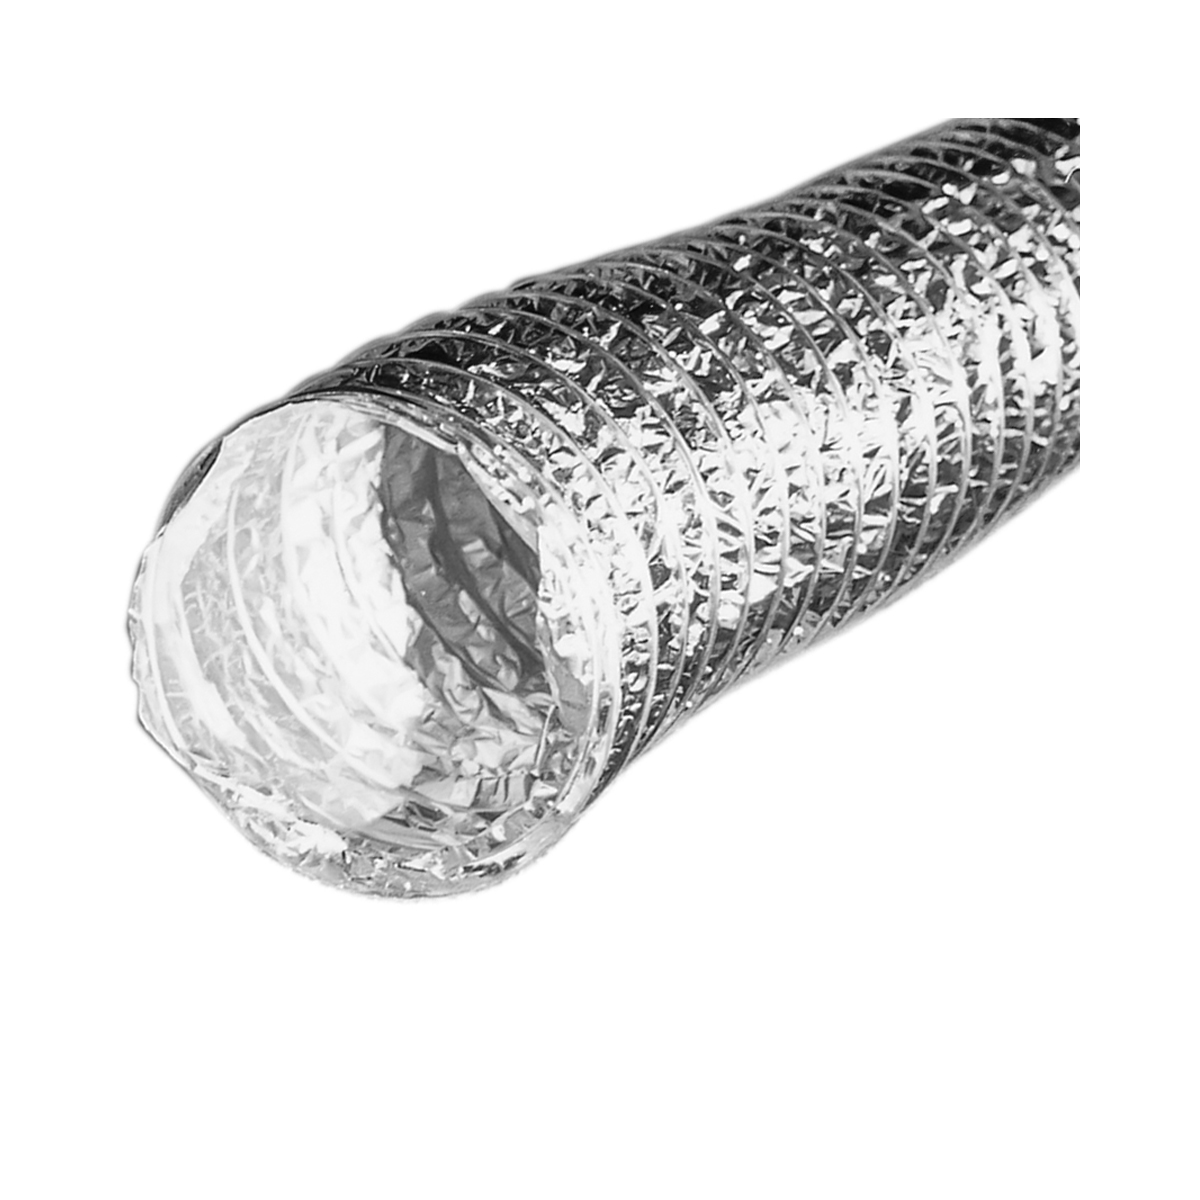 Builder's Best 110222 Foil Duct, 4 in, 25 ft L, Metalized Polyester/Aluminum/Polyester Laminate - 1